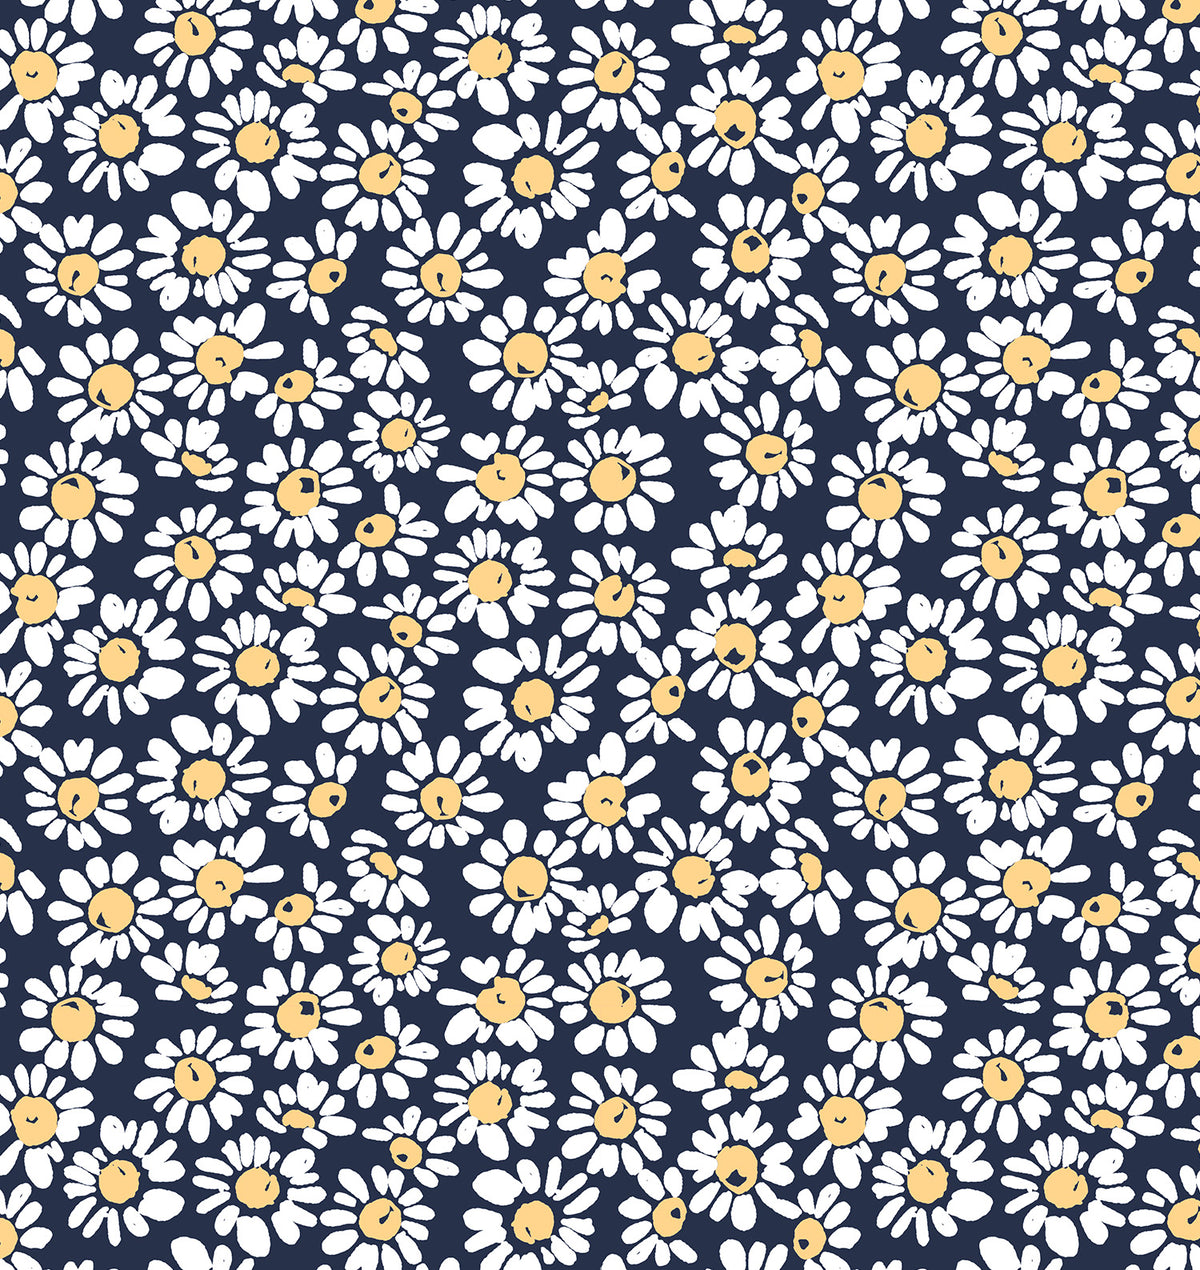 Swim Systems Flower Field swimsuit print with white daisies on a navy background, made from recycled fabric